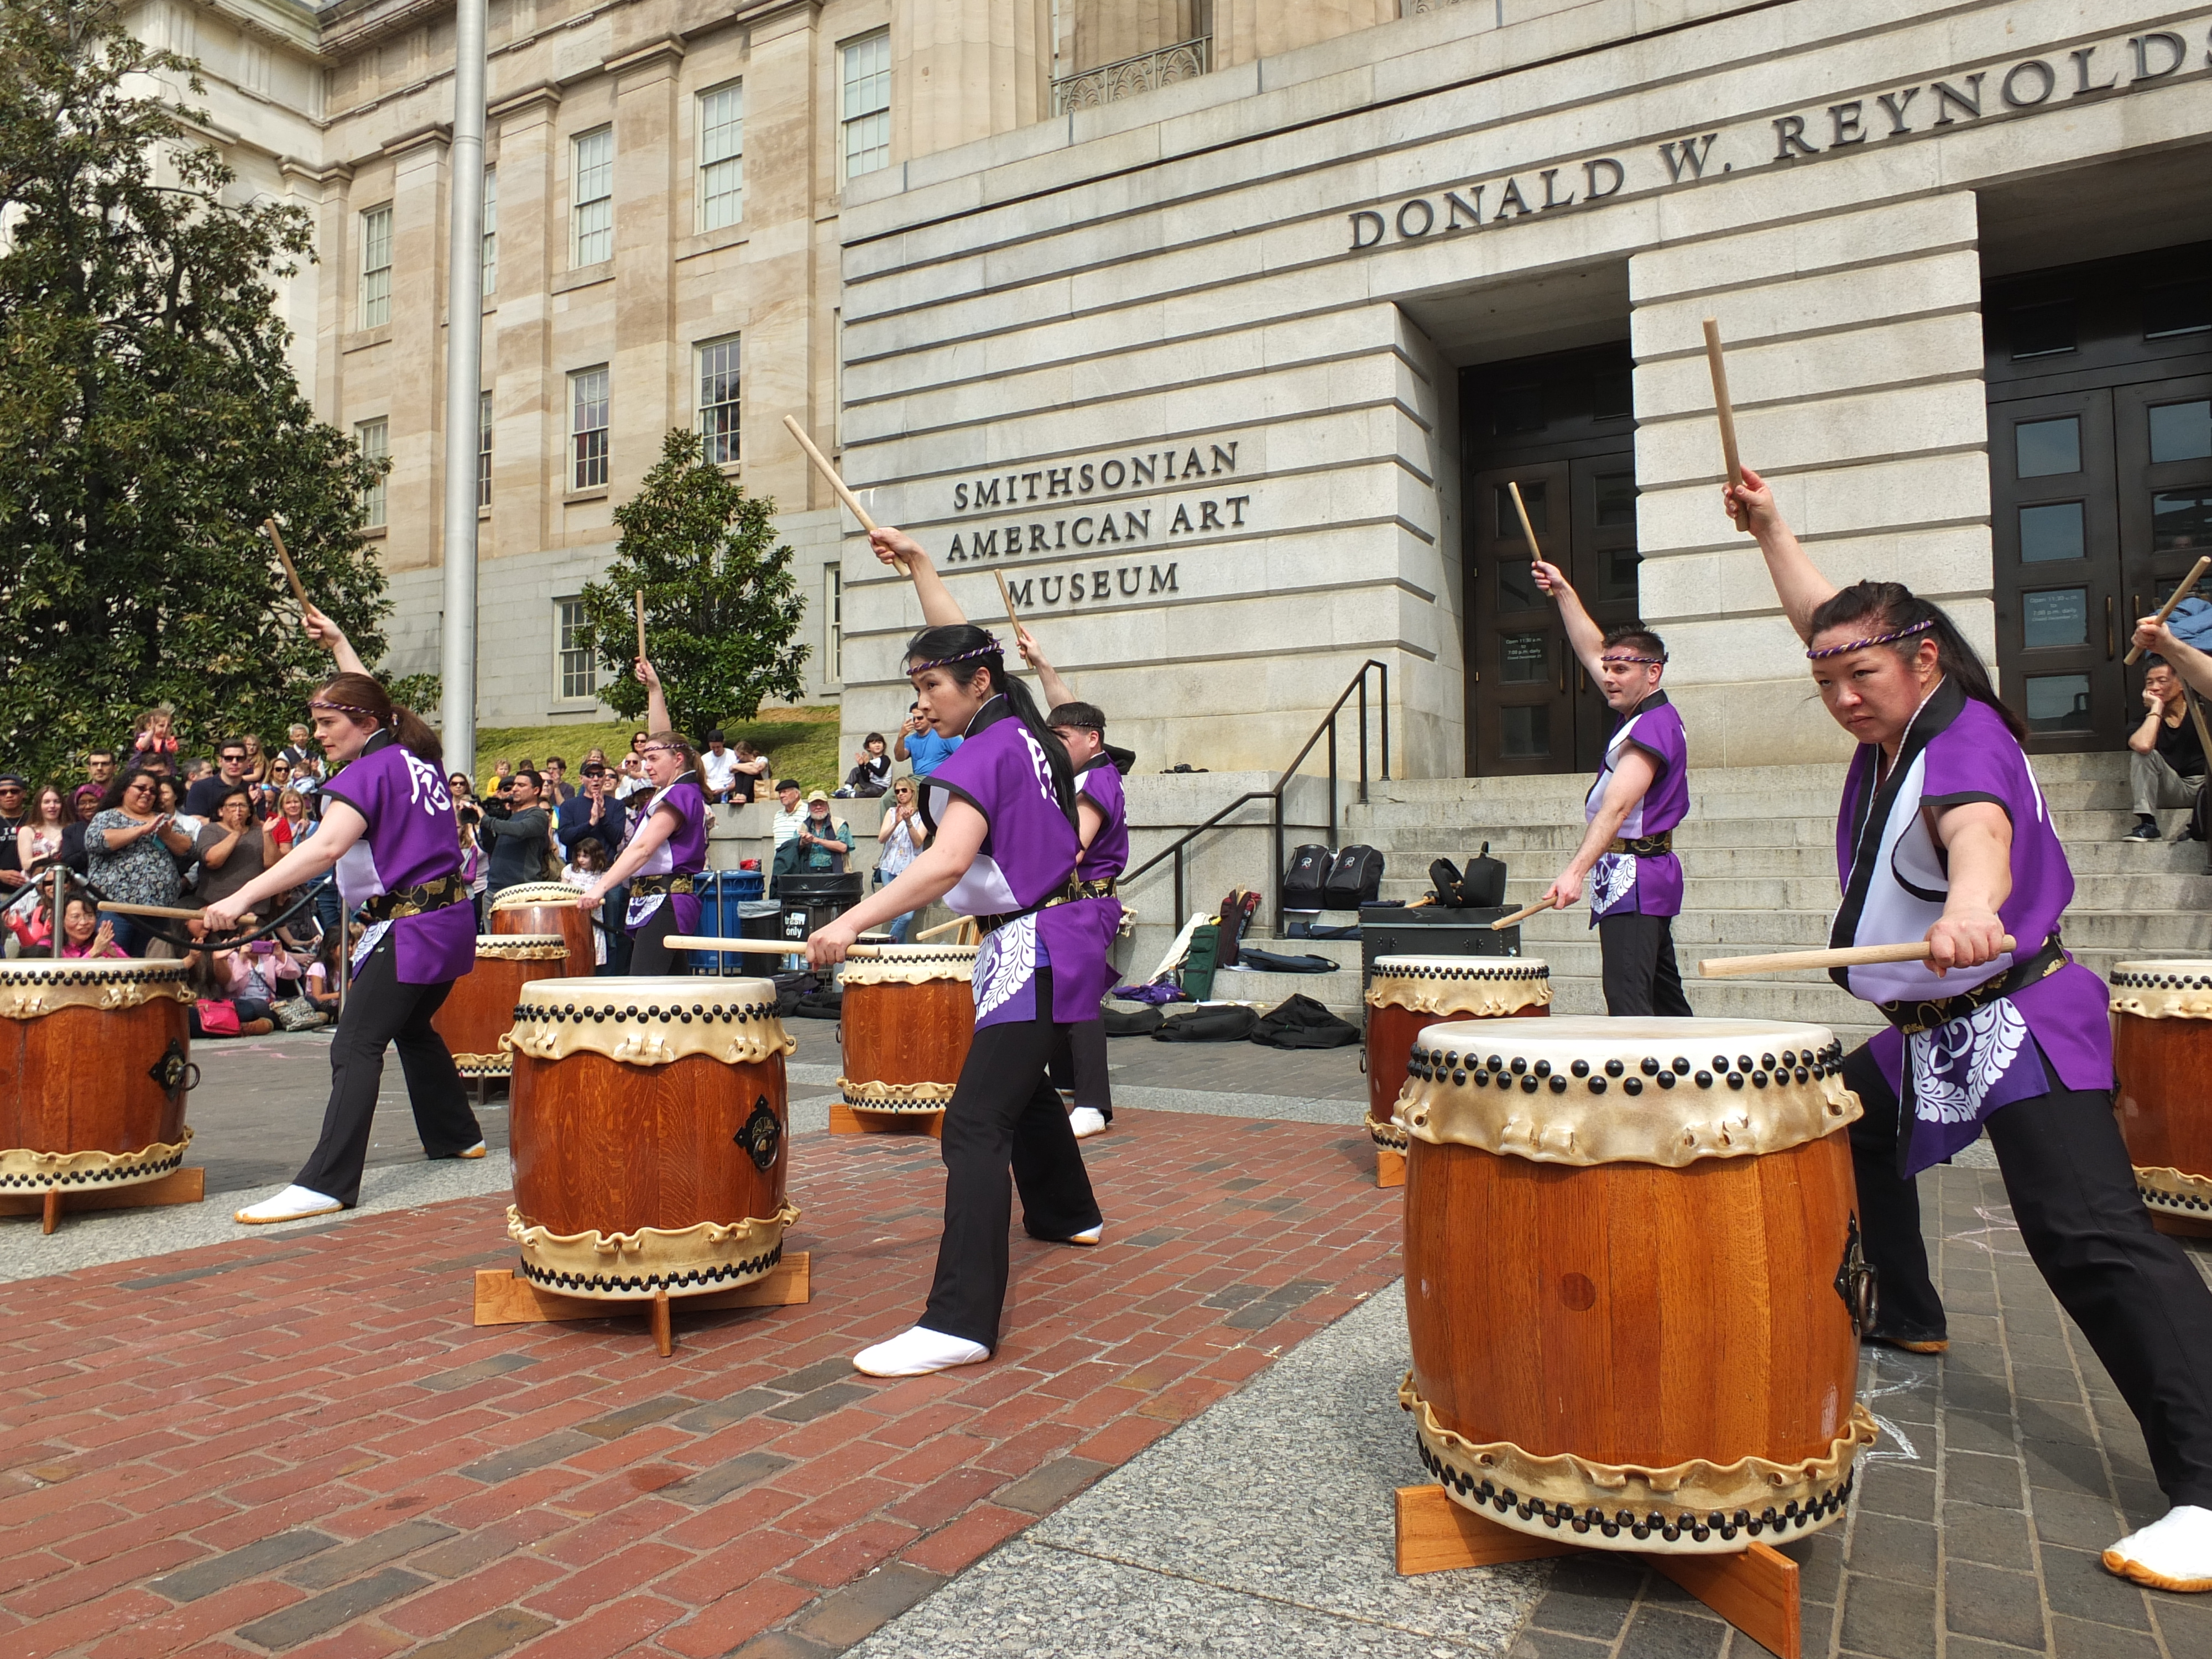 Group of large drums are being played by drummers outside American Art Museum